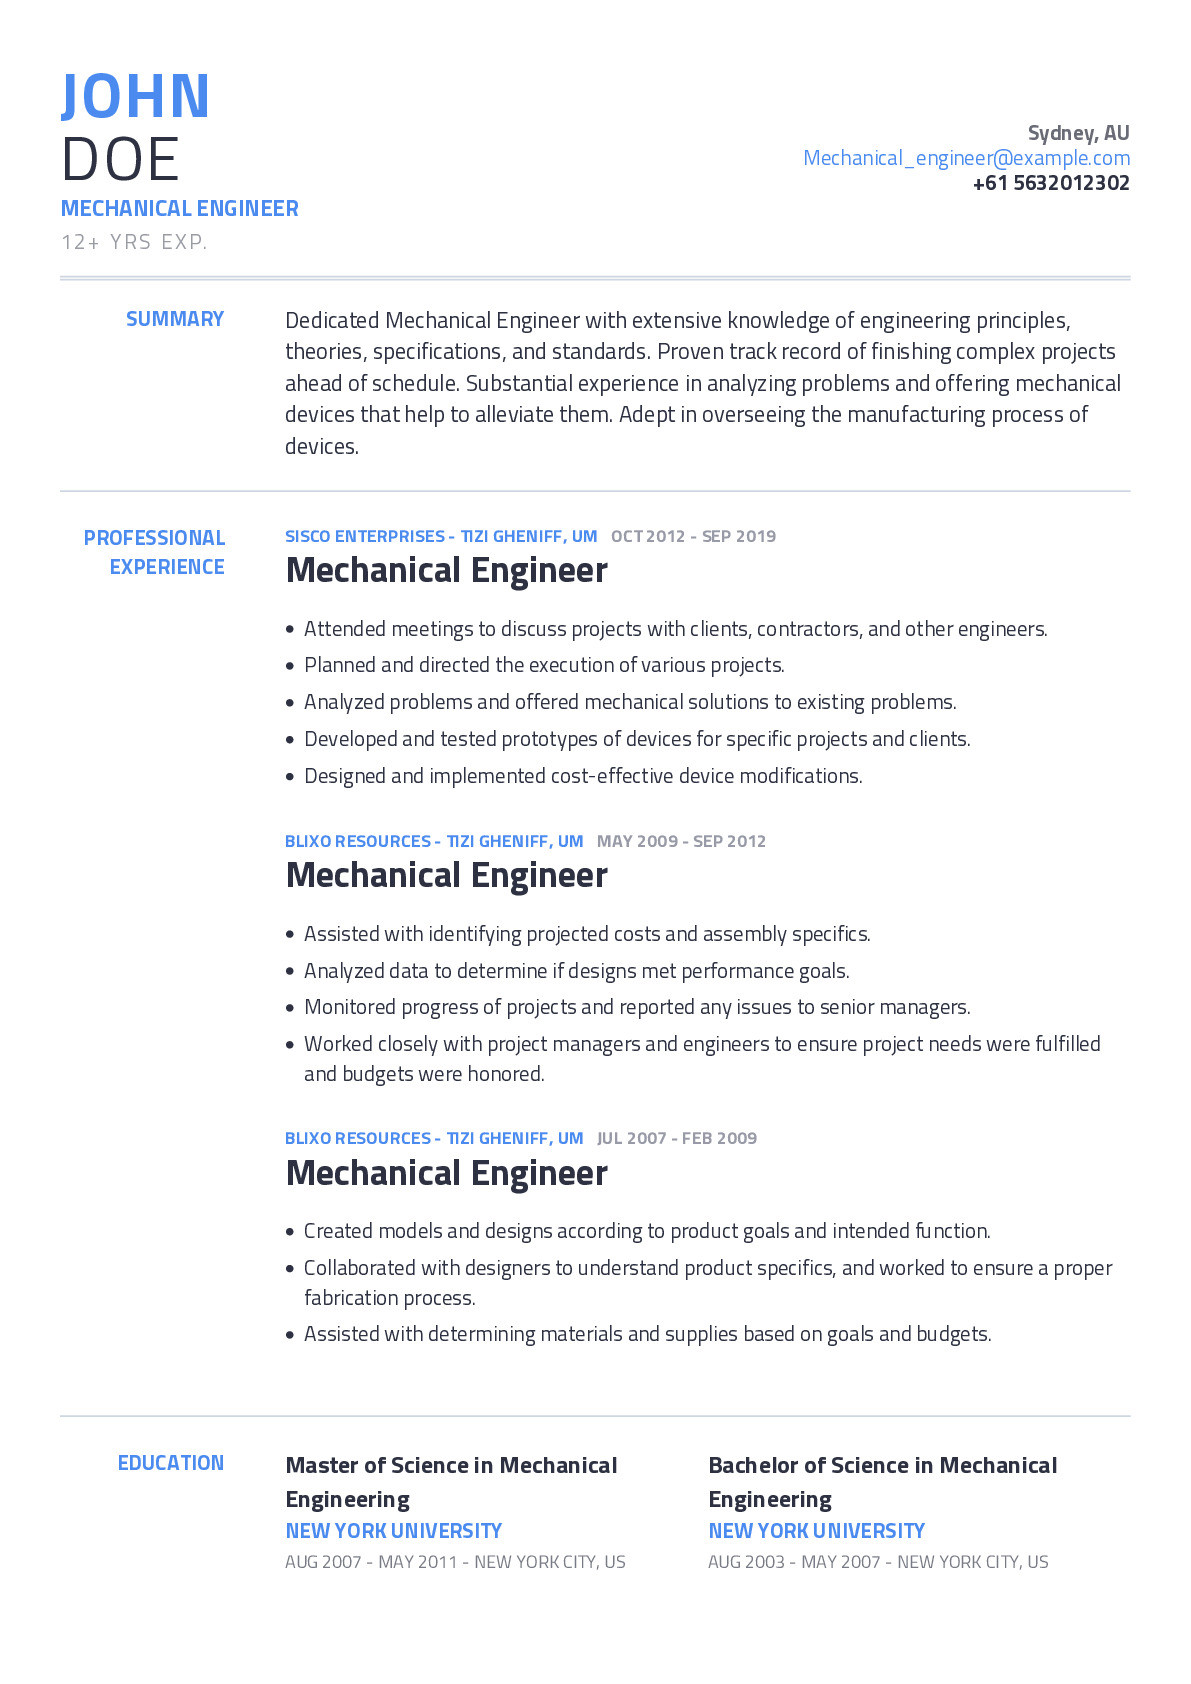 Sample Resumes for Mechanical Engineers Graduating College Mechanical Engineer Resume Example with Content Sample Craftmycv